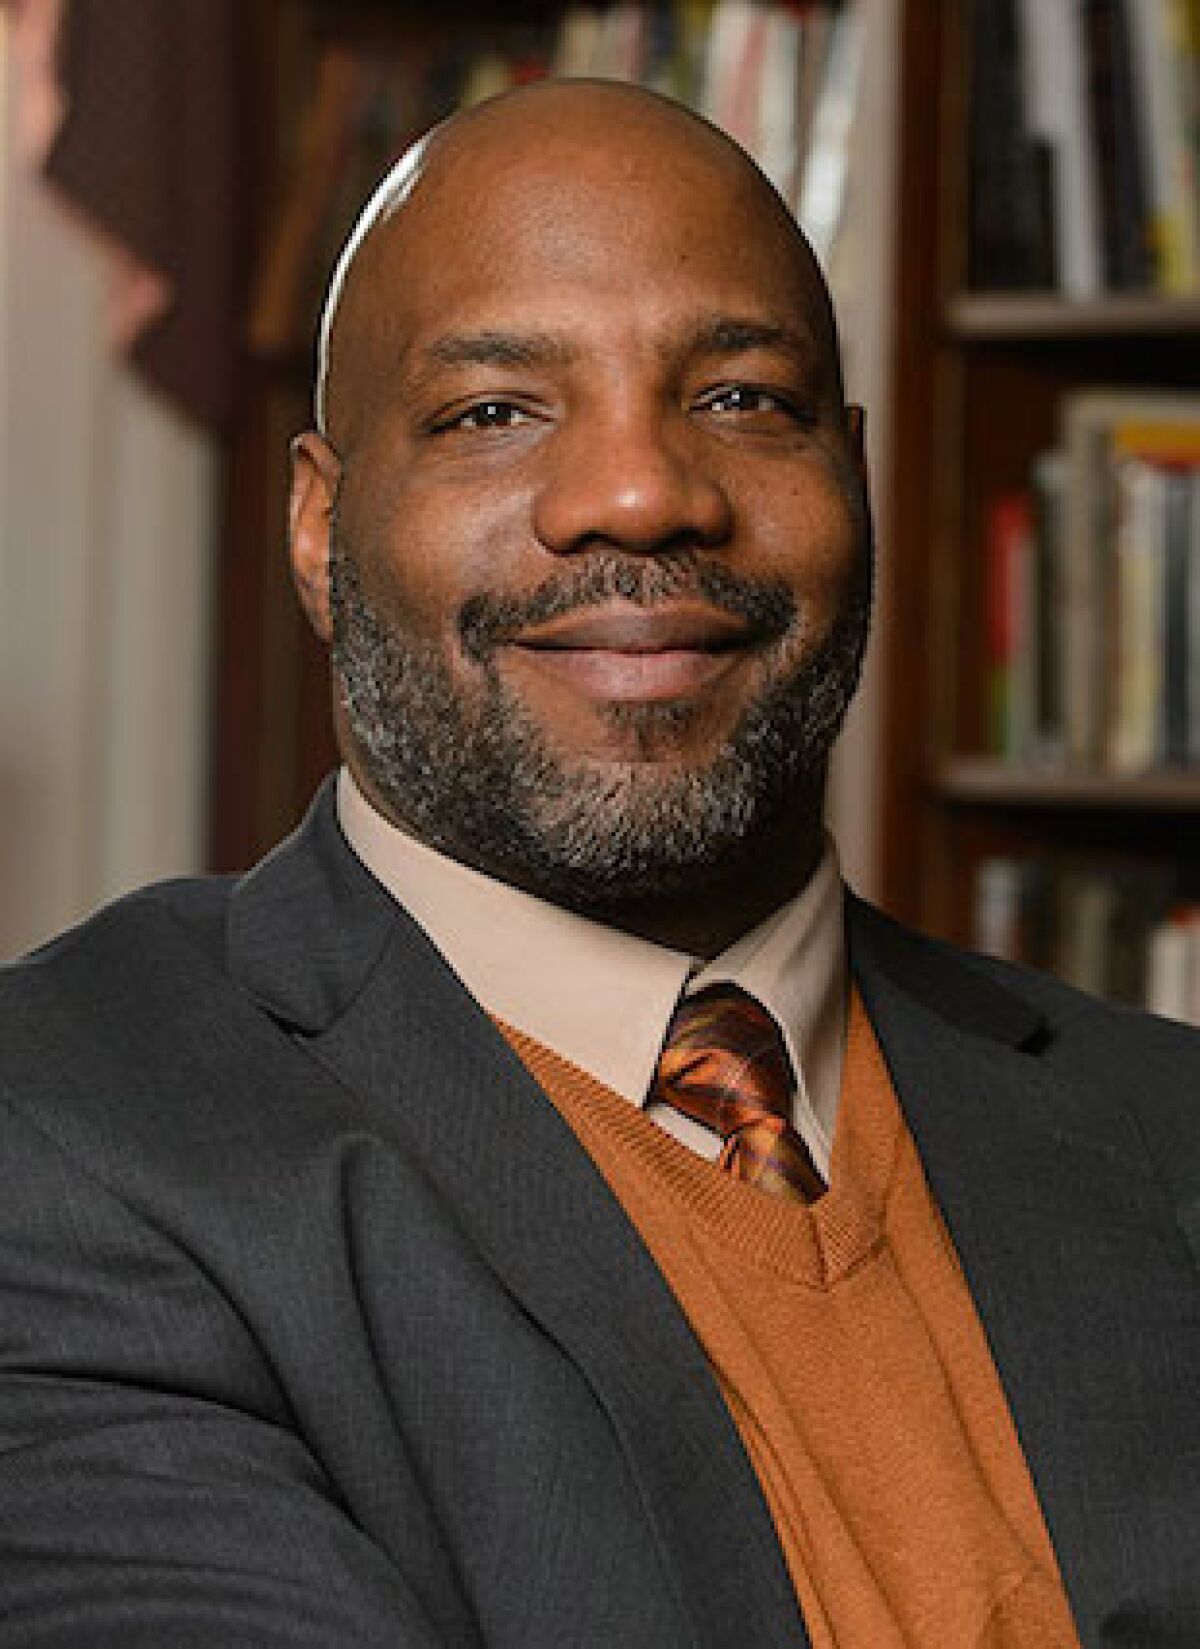 Jelani Cobb, co-editor of "The Essential Kerner Commission Report."